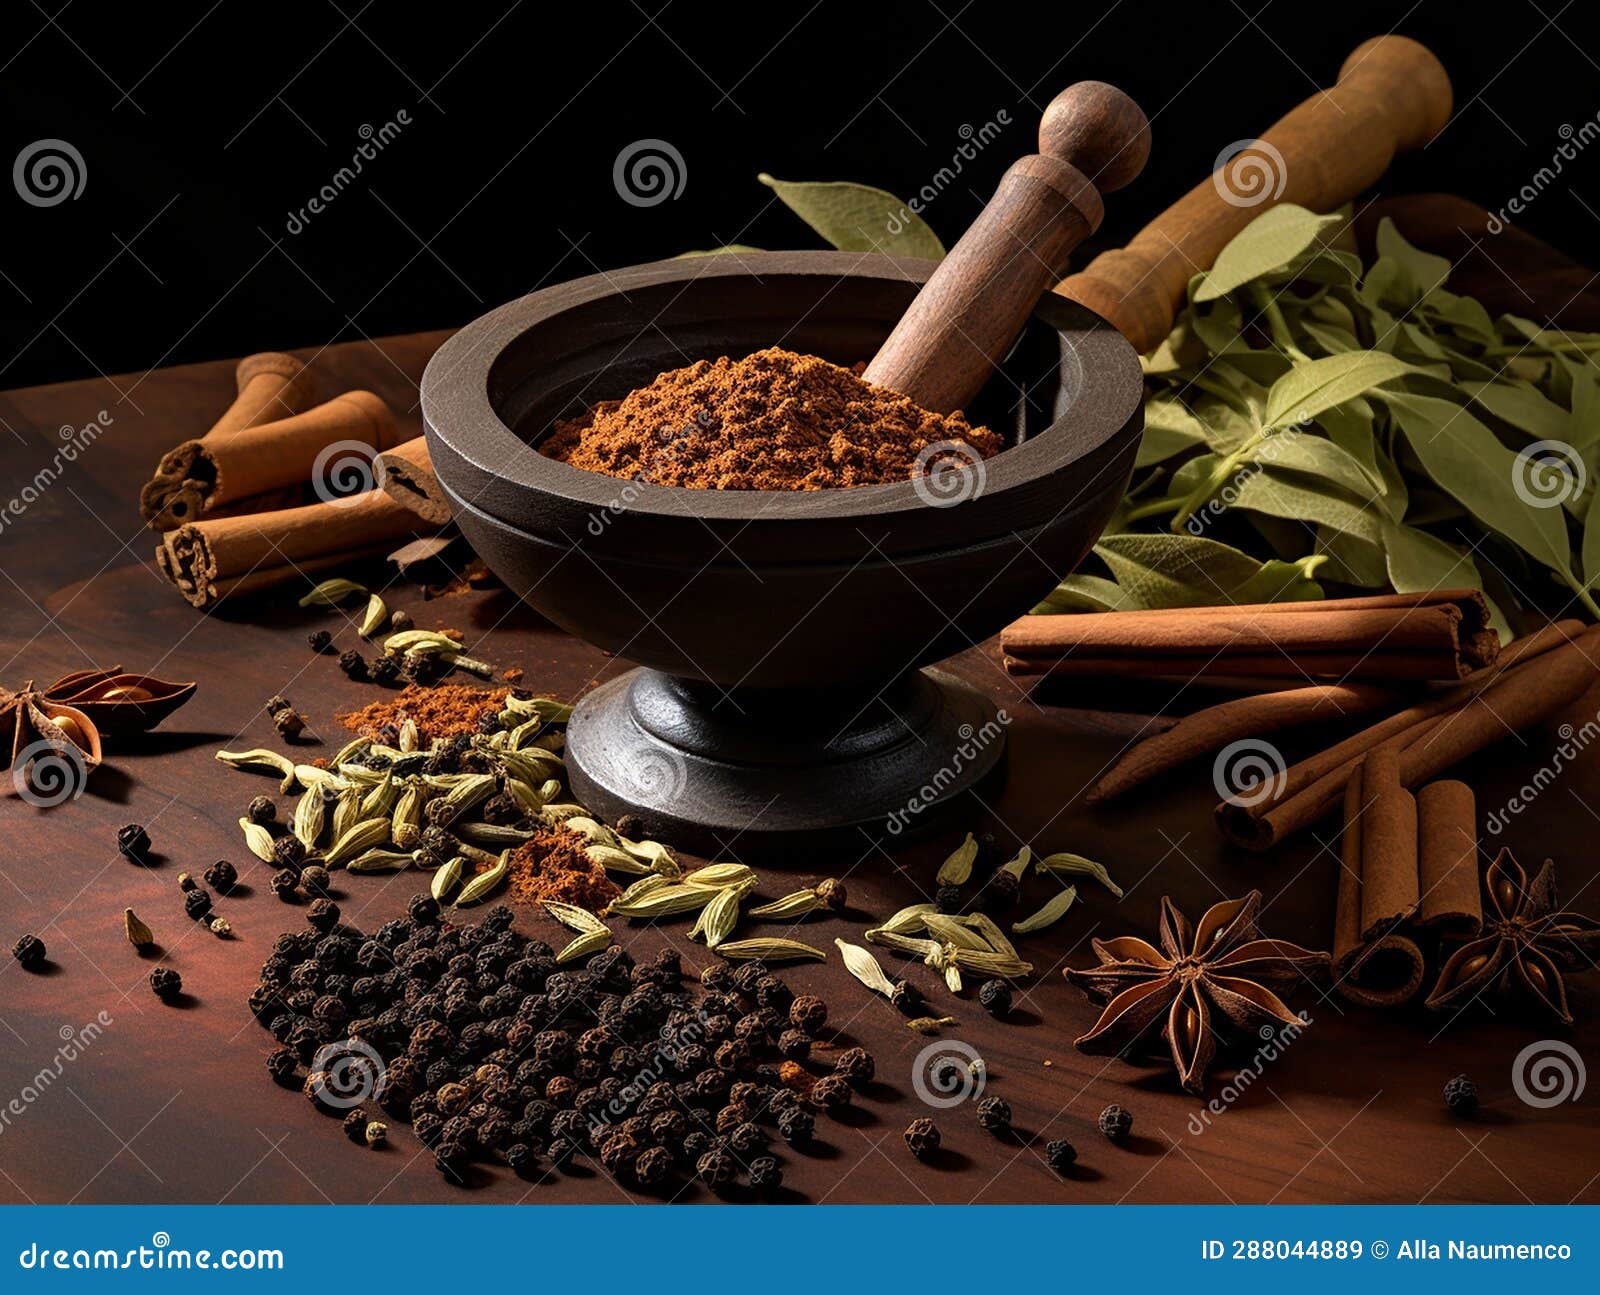 mortar and pestle with whole spices